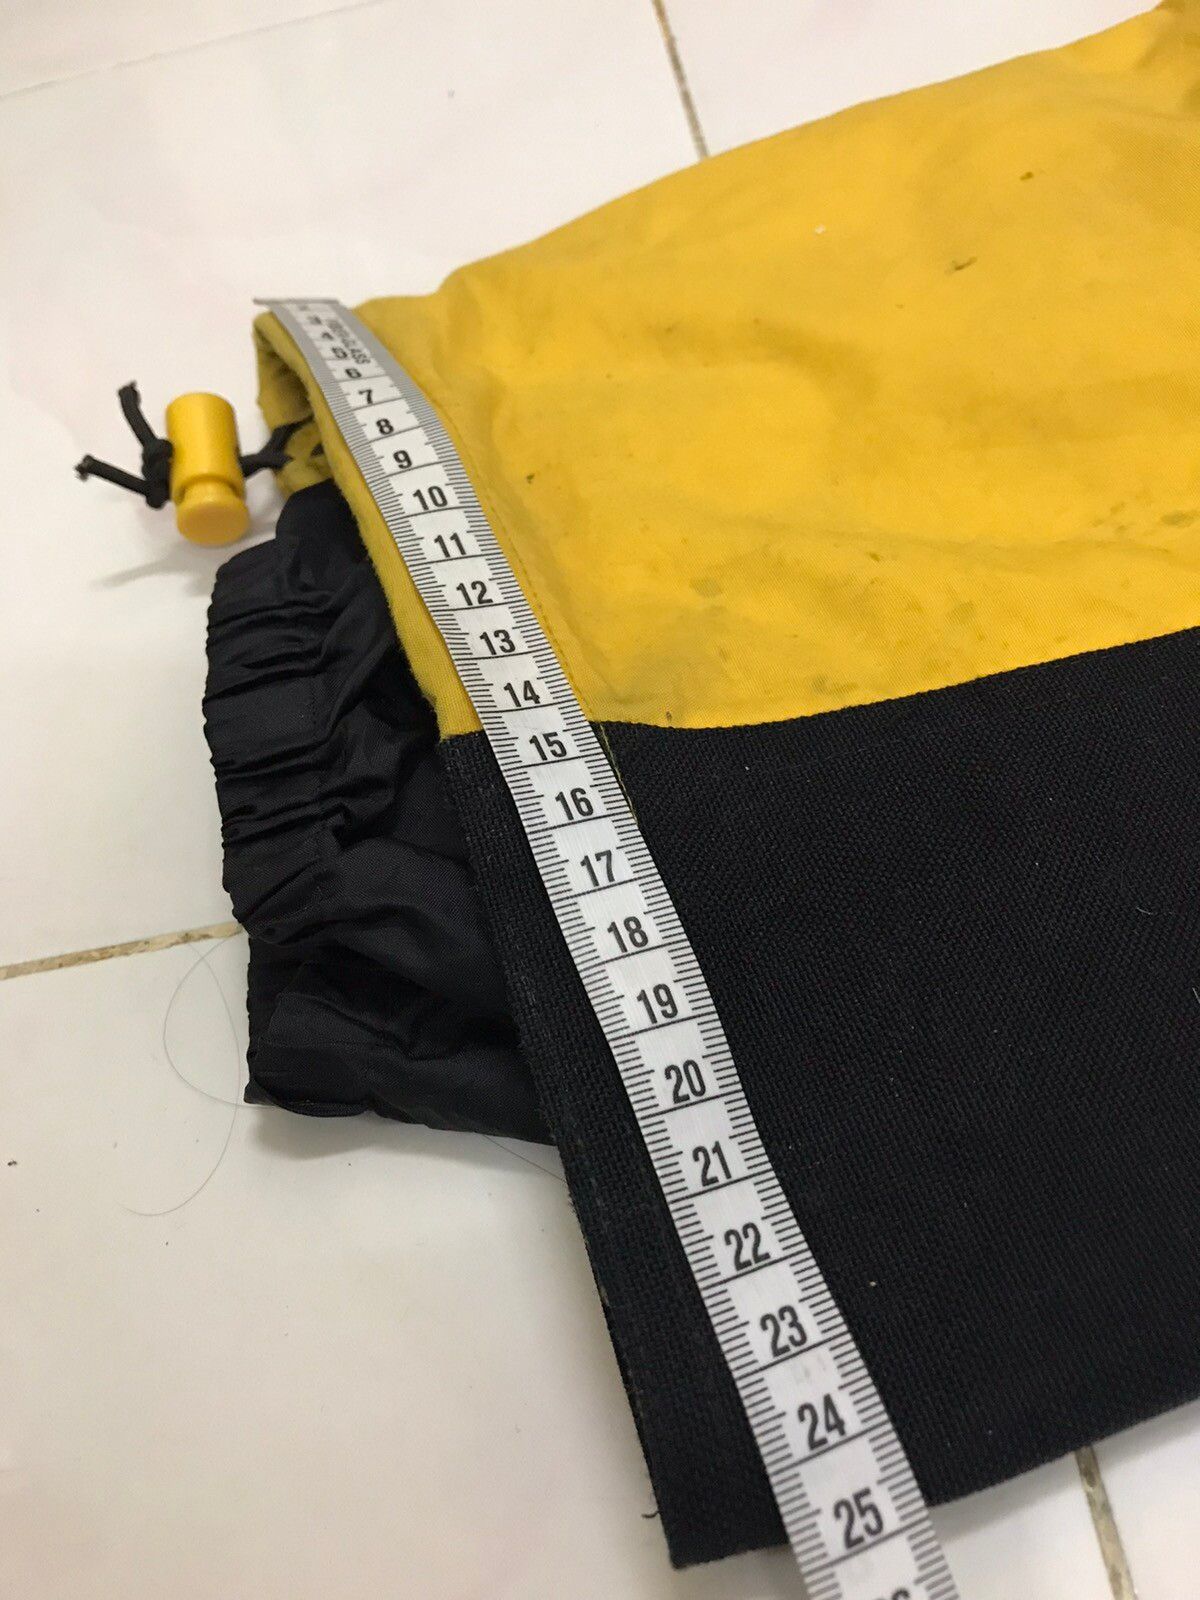 THE NORTH FACE” GORE-TEX SKI PANTS BIBS OVERALLS IN YELLOW - 14